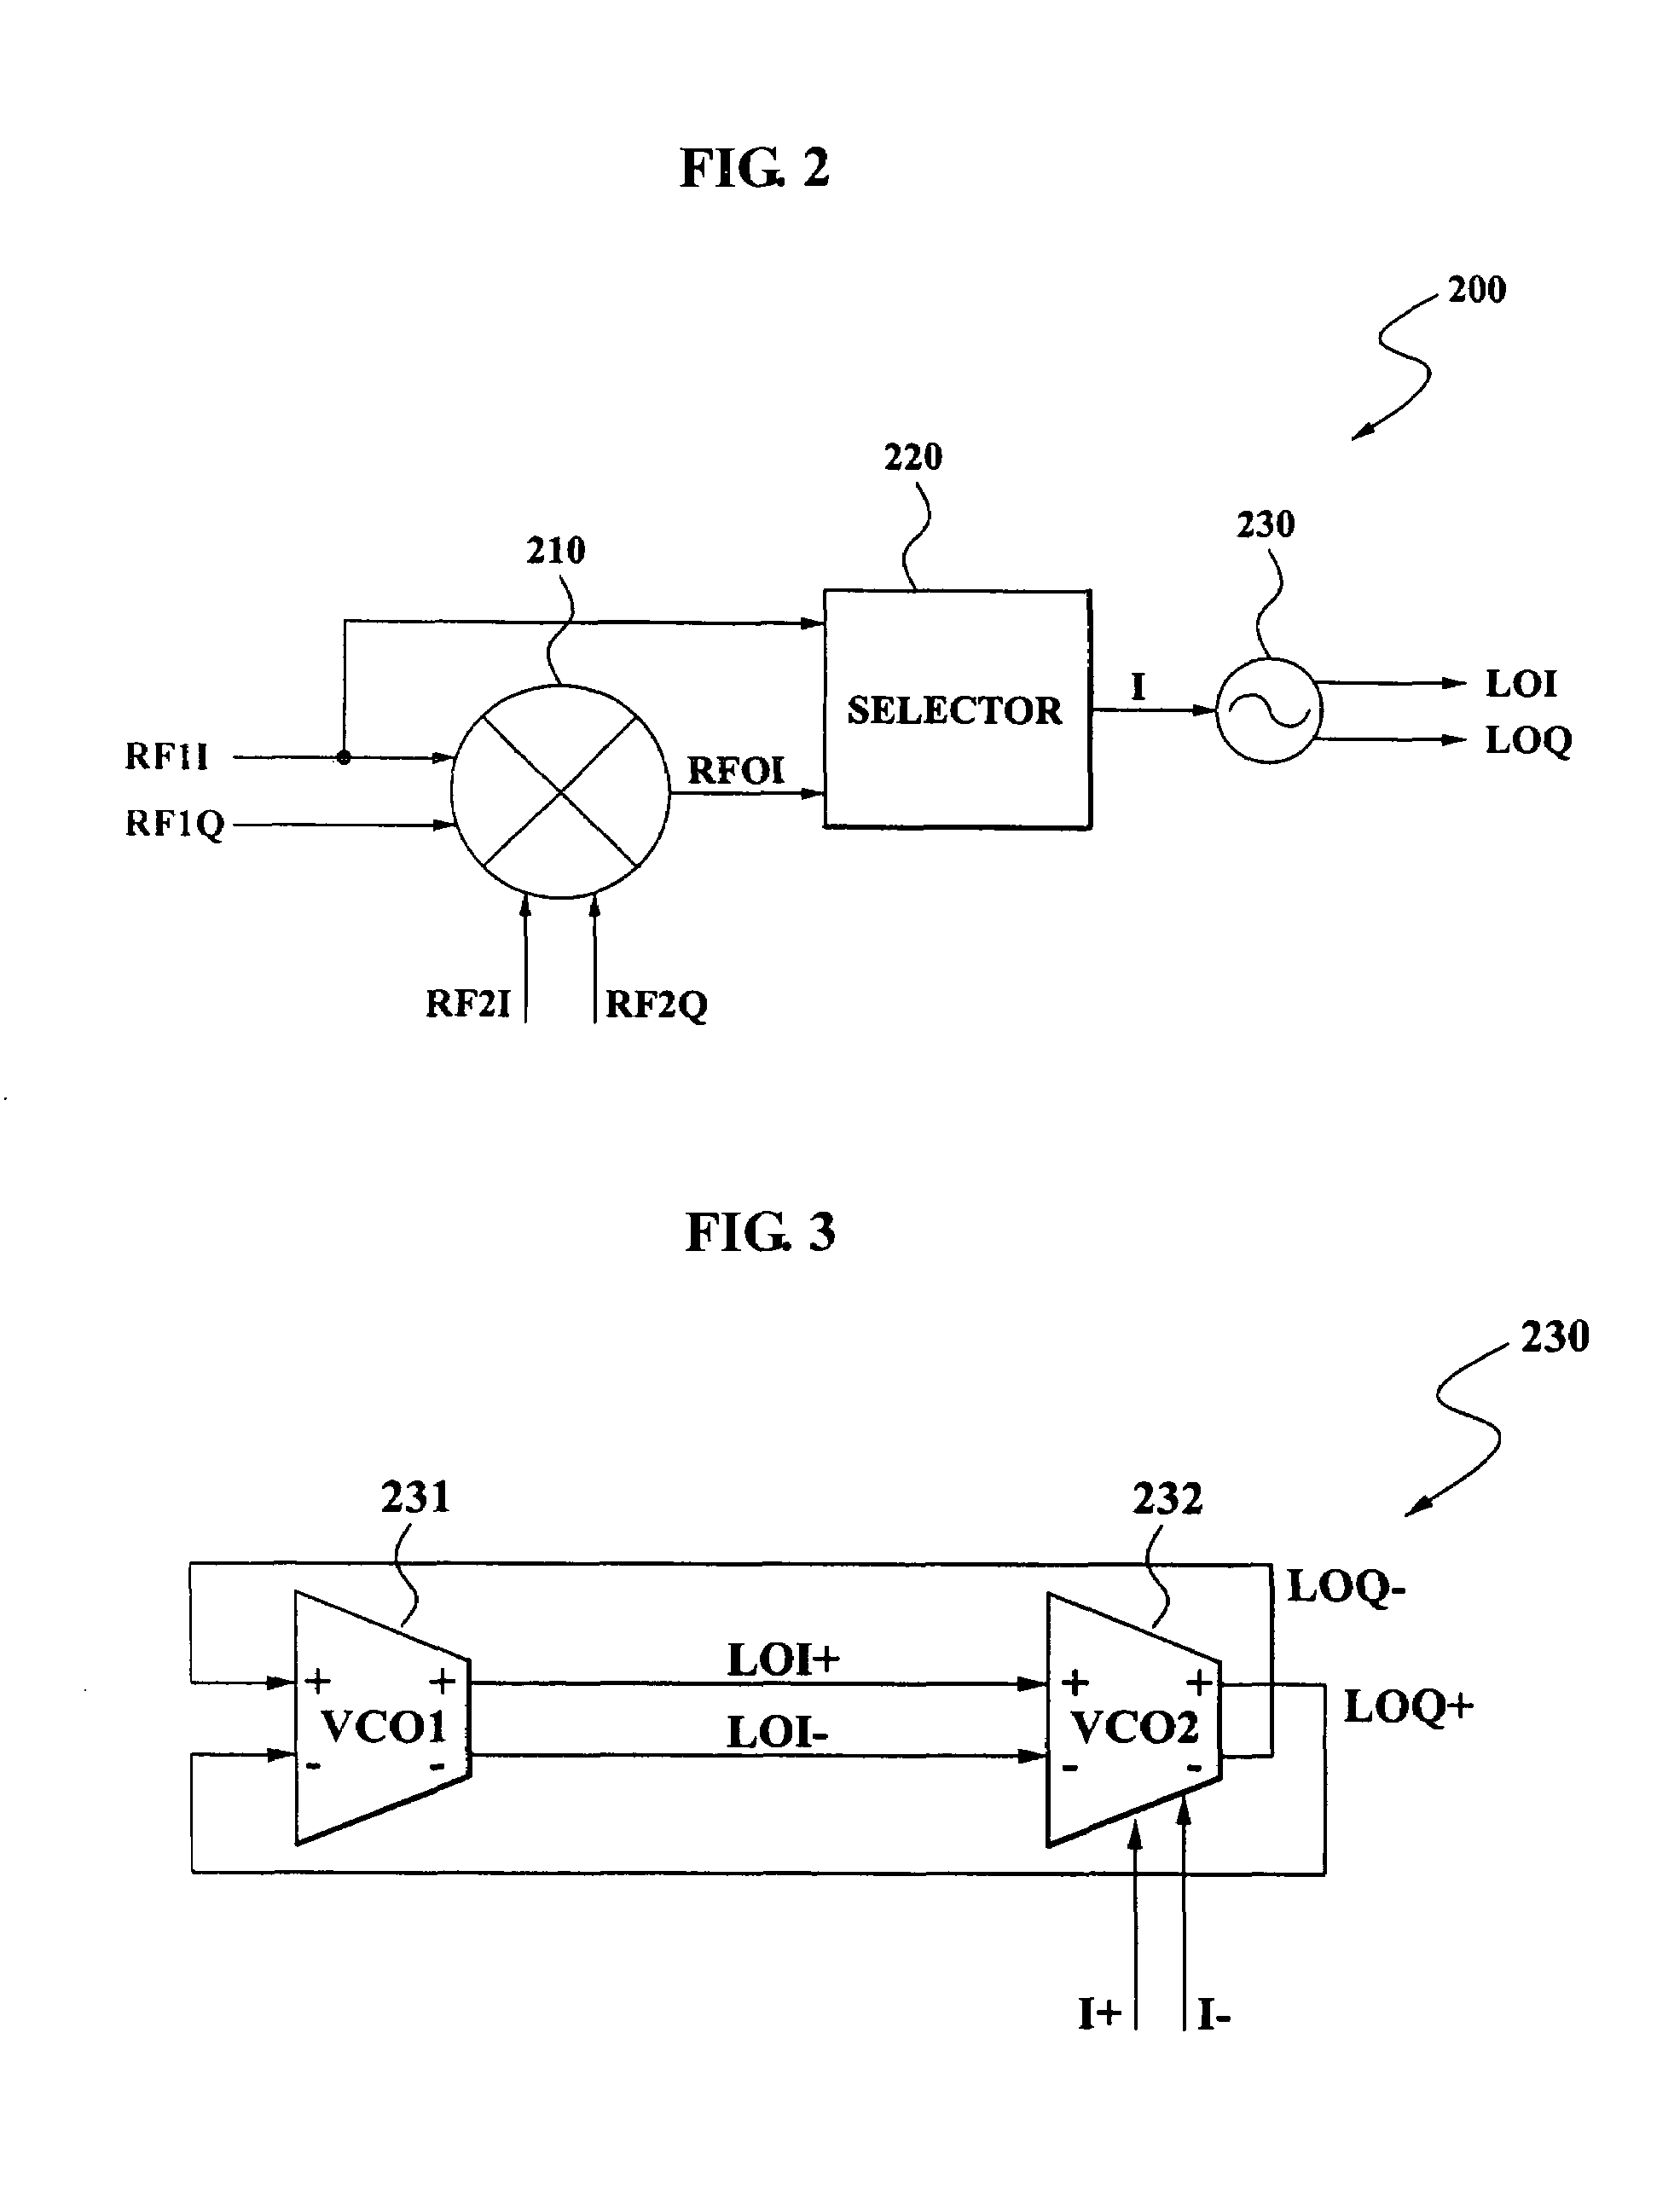 Frequency synthesizing apparatus and method having injection-locked quadrature VCO in RF transceiver